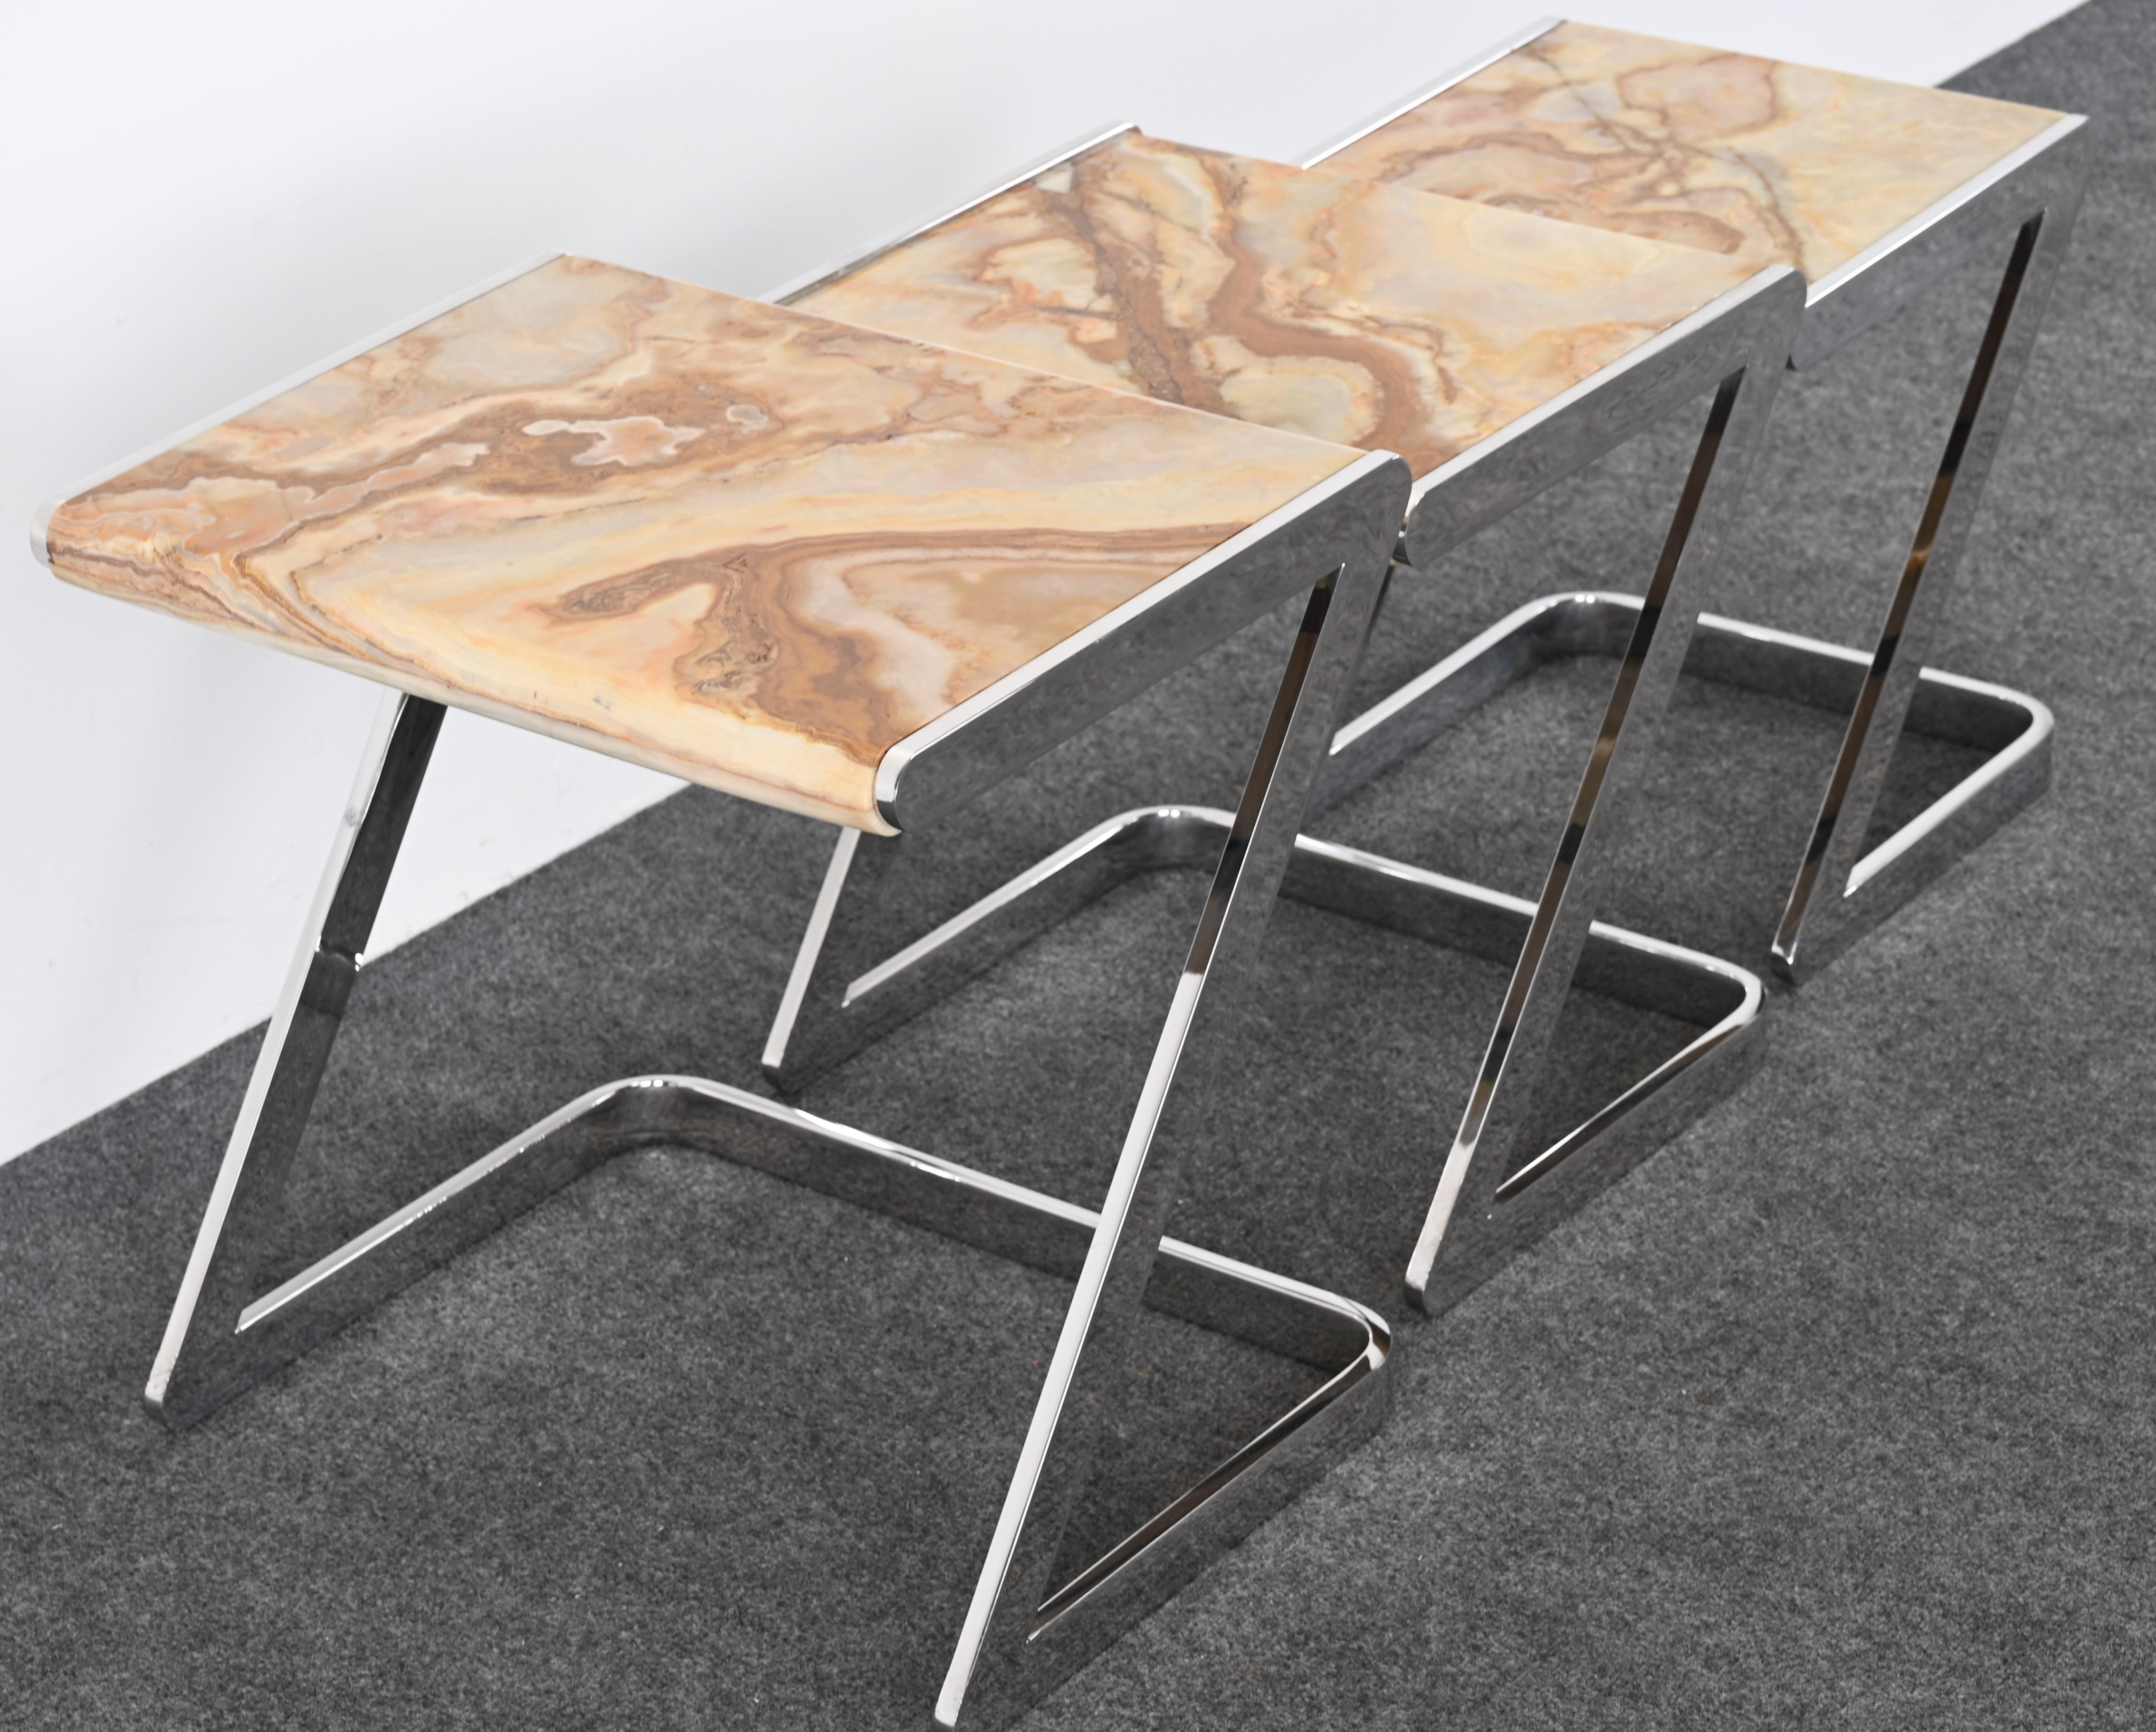 Onyx and Stainless Steel Nesting Tables by Brueton, 1980s For Sale 14